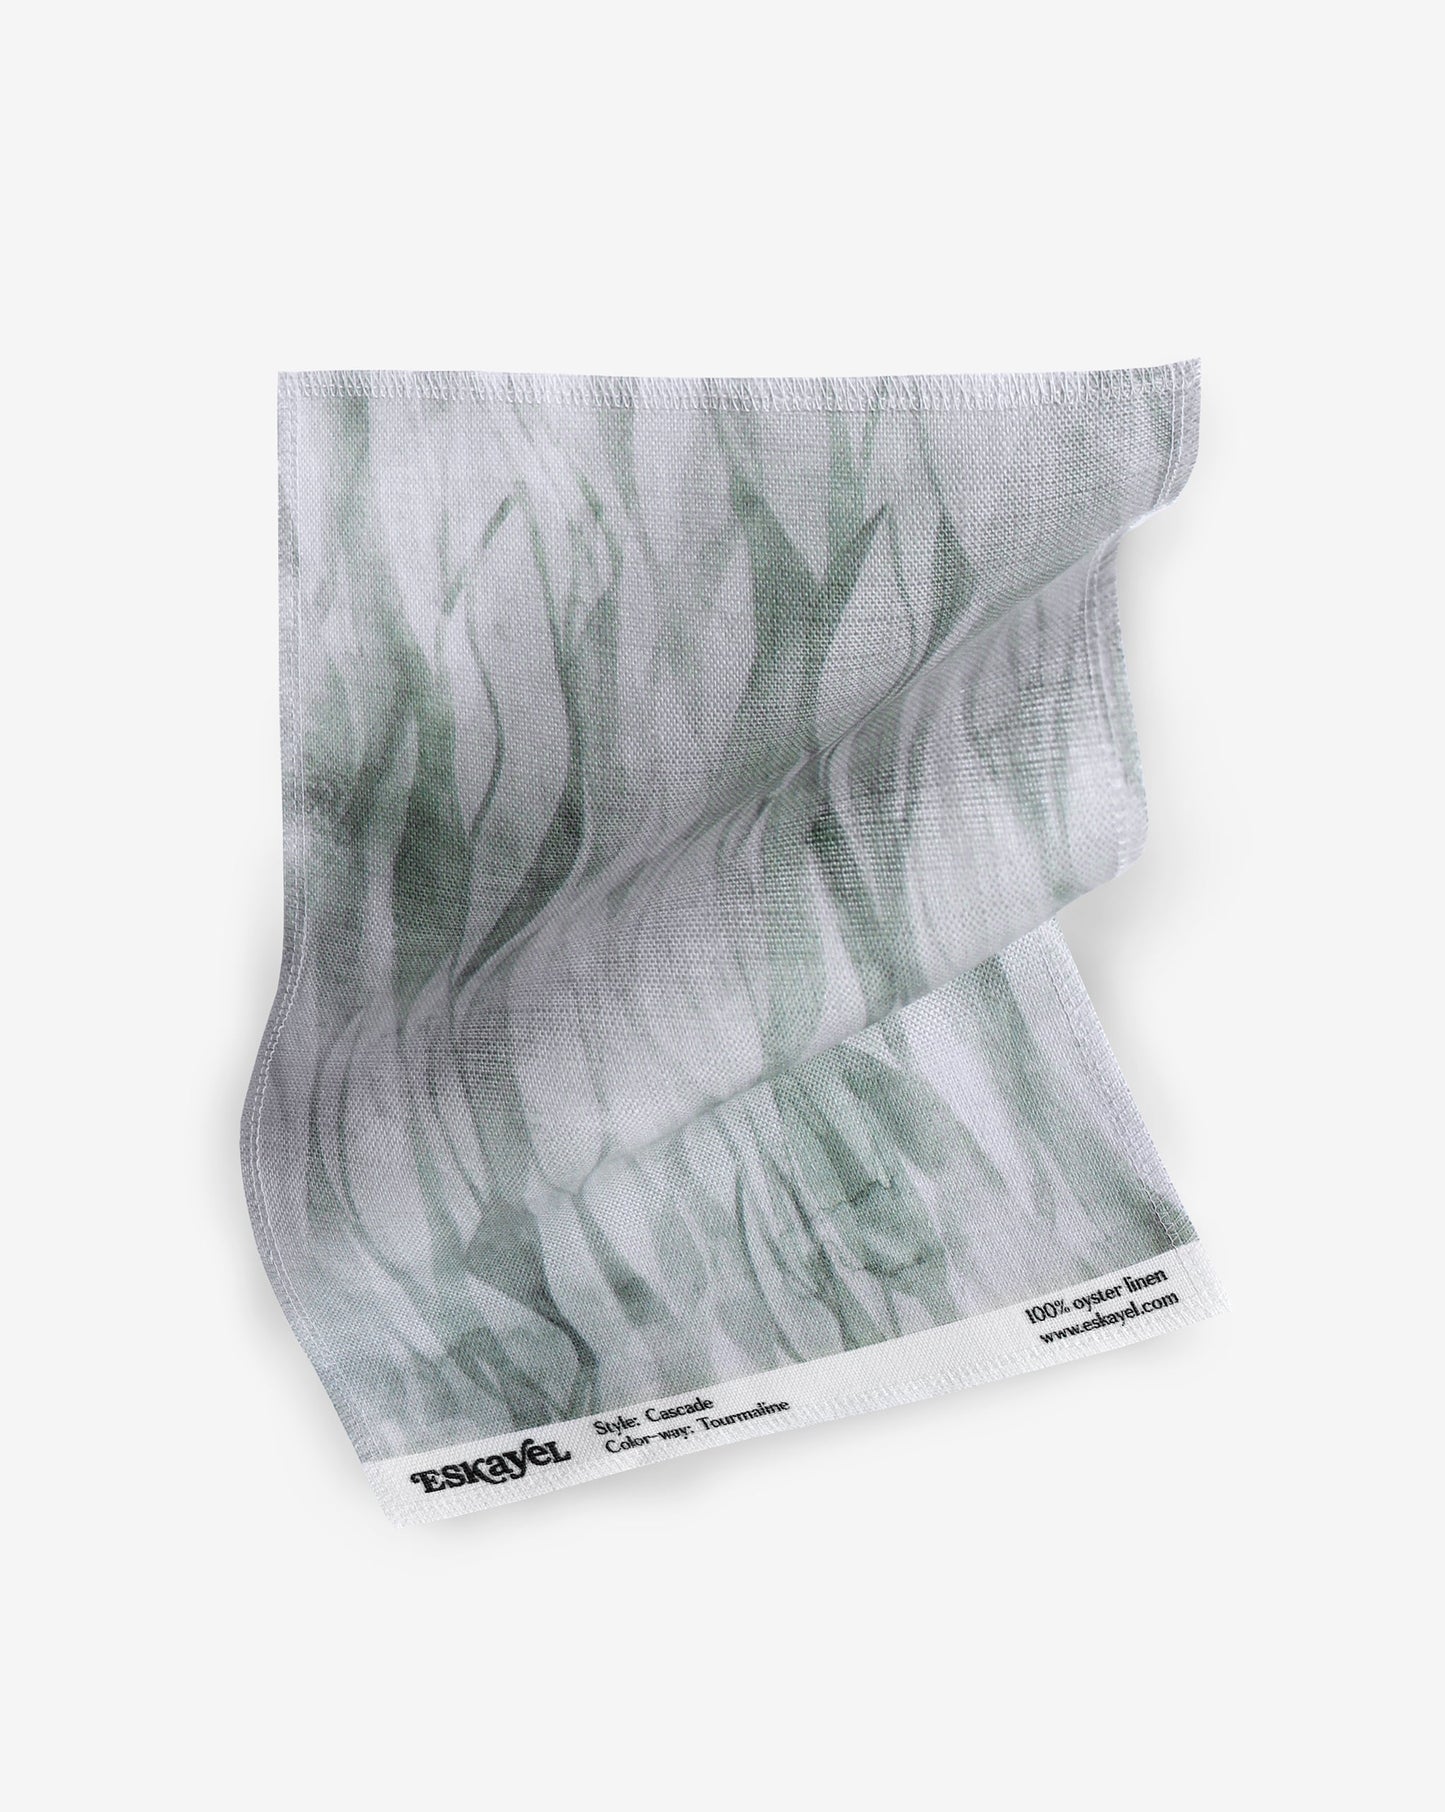 A fabric with our cascade pattern in tourmaline featuring a design that explores positive and negative space to evoke a feeling of vertical motion in shades of green.